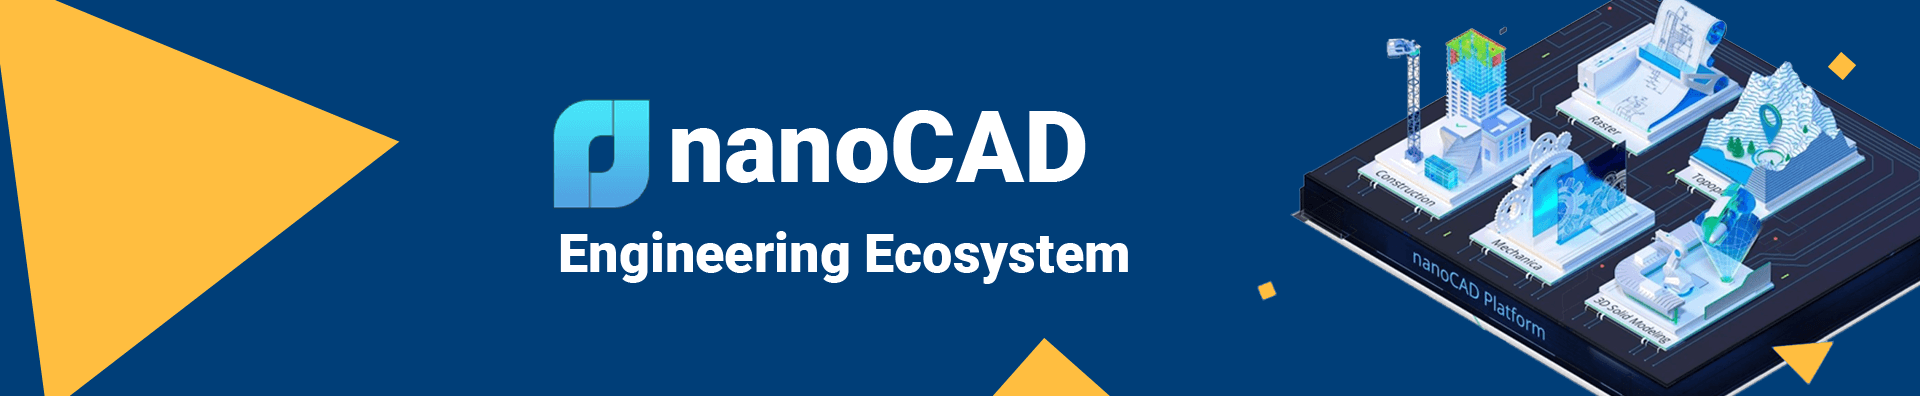 nanoCAD - The best engineering CAD solution for professionals